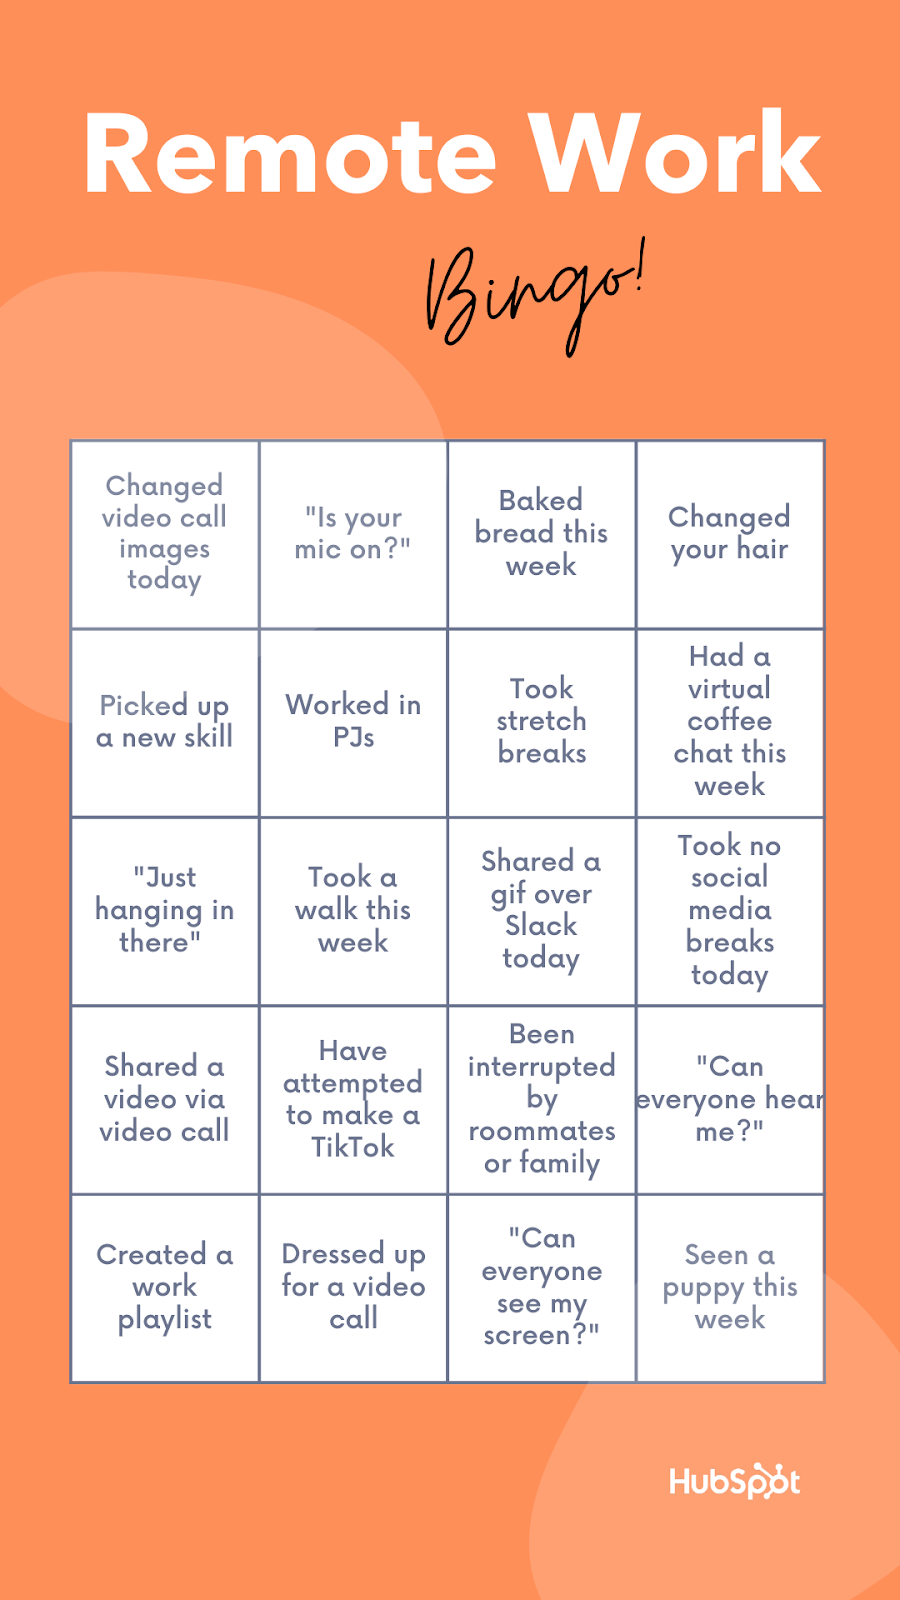 How to play remote bingo